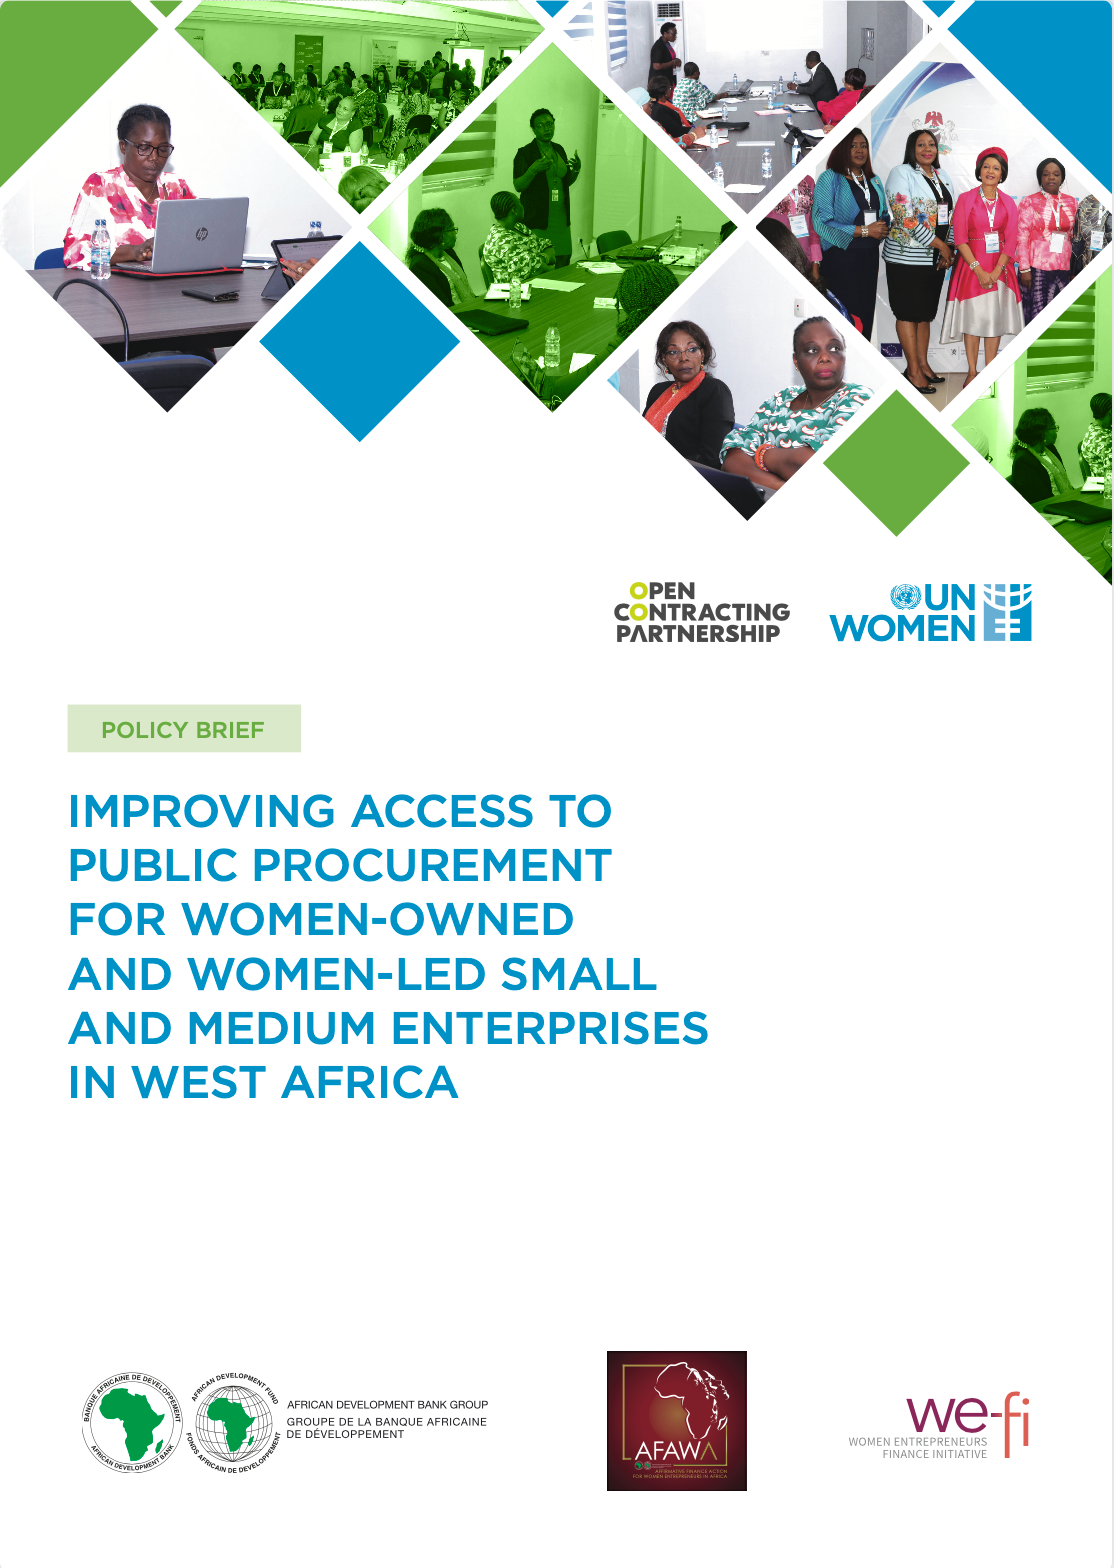 IMPROVING ACCESS TO PUBLIC PROCUREMENT FOR WOMEN-OWNED AND WOMEN-LED SMALL AND MEDIUM ENTERPRISES IN WEST AFRICA